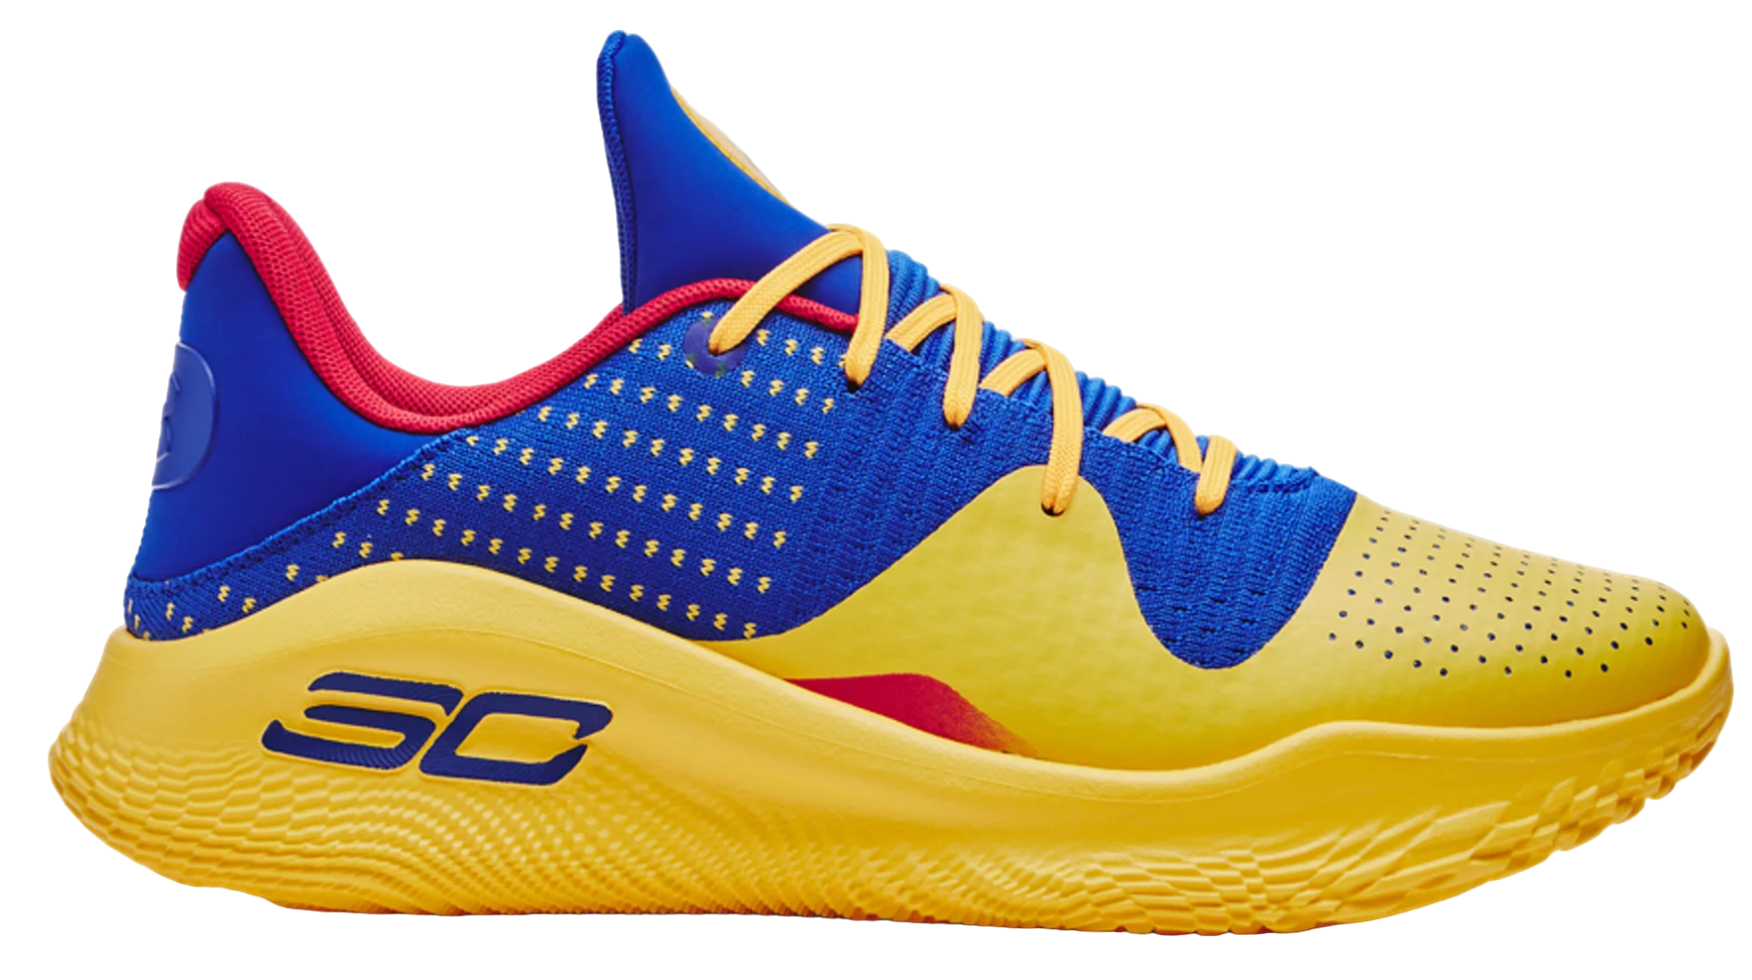 Basketball shoes Under Armour Curry 4 Low Flotro